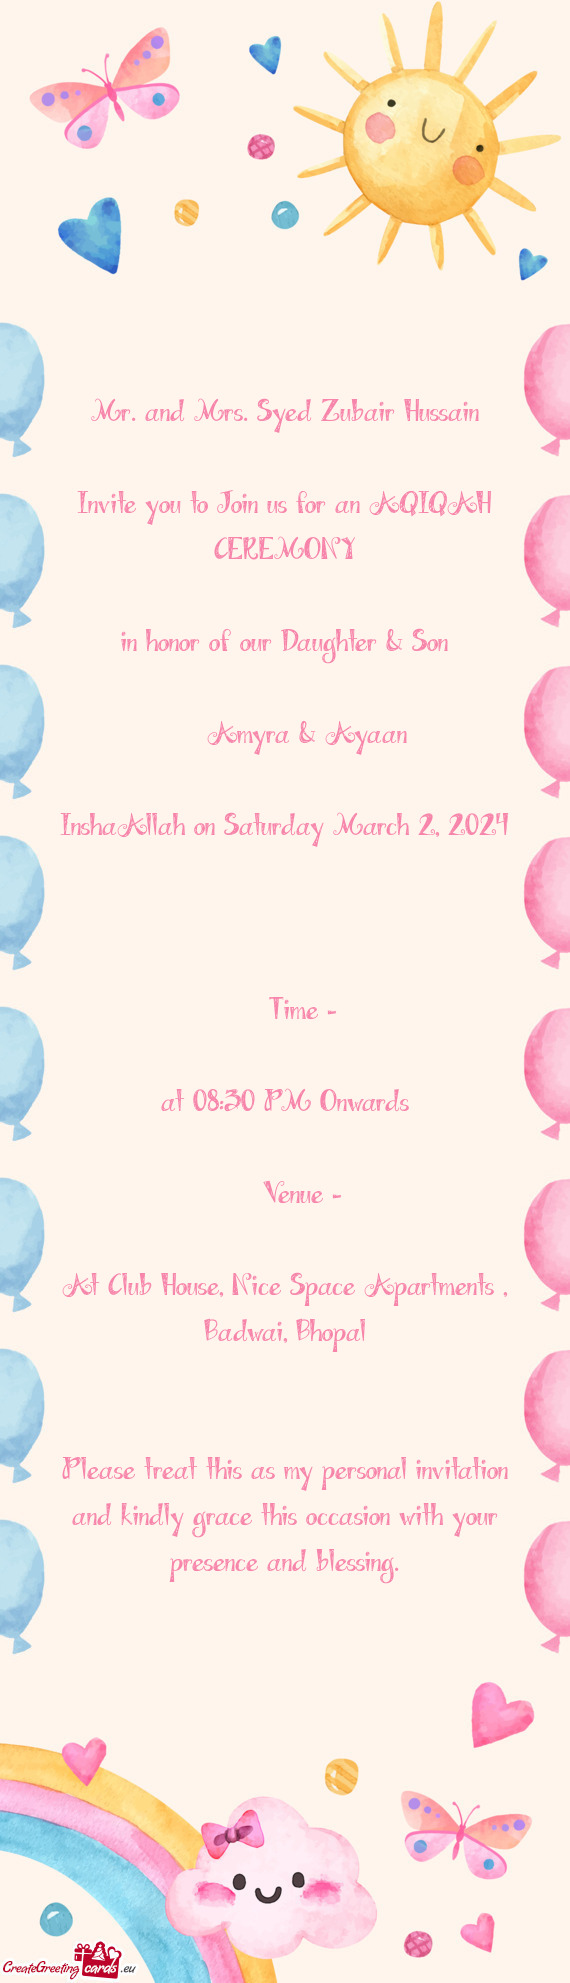 Invite you to Join us for an AQIQAH CEREMONY